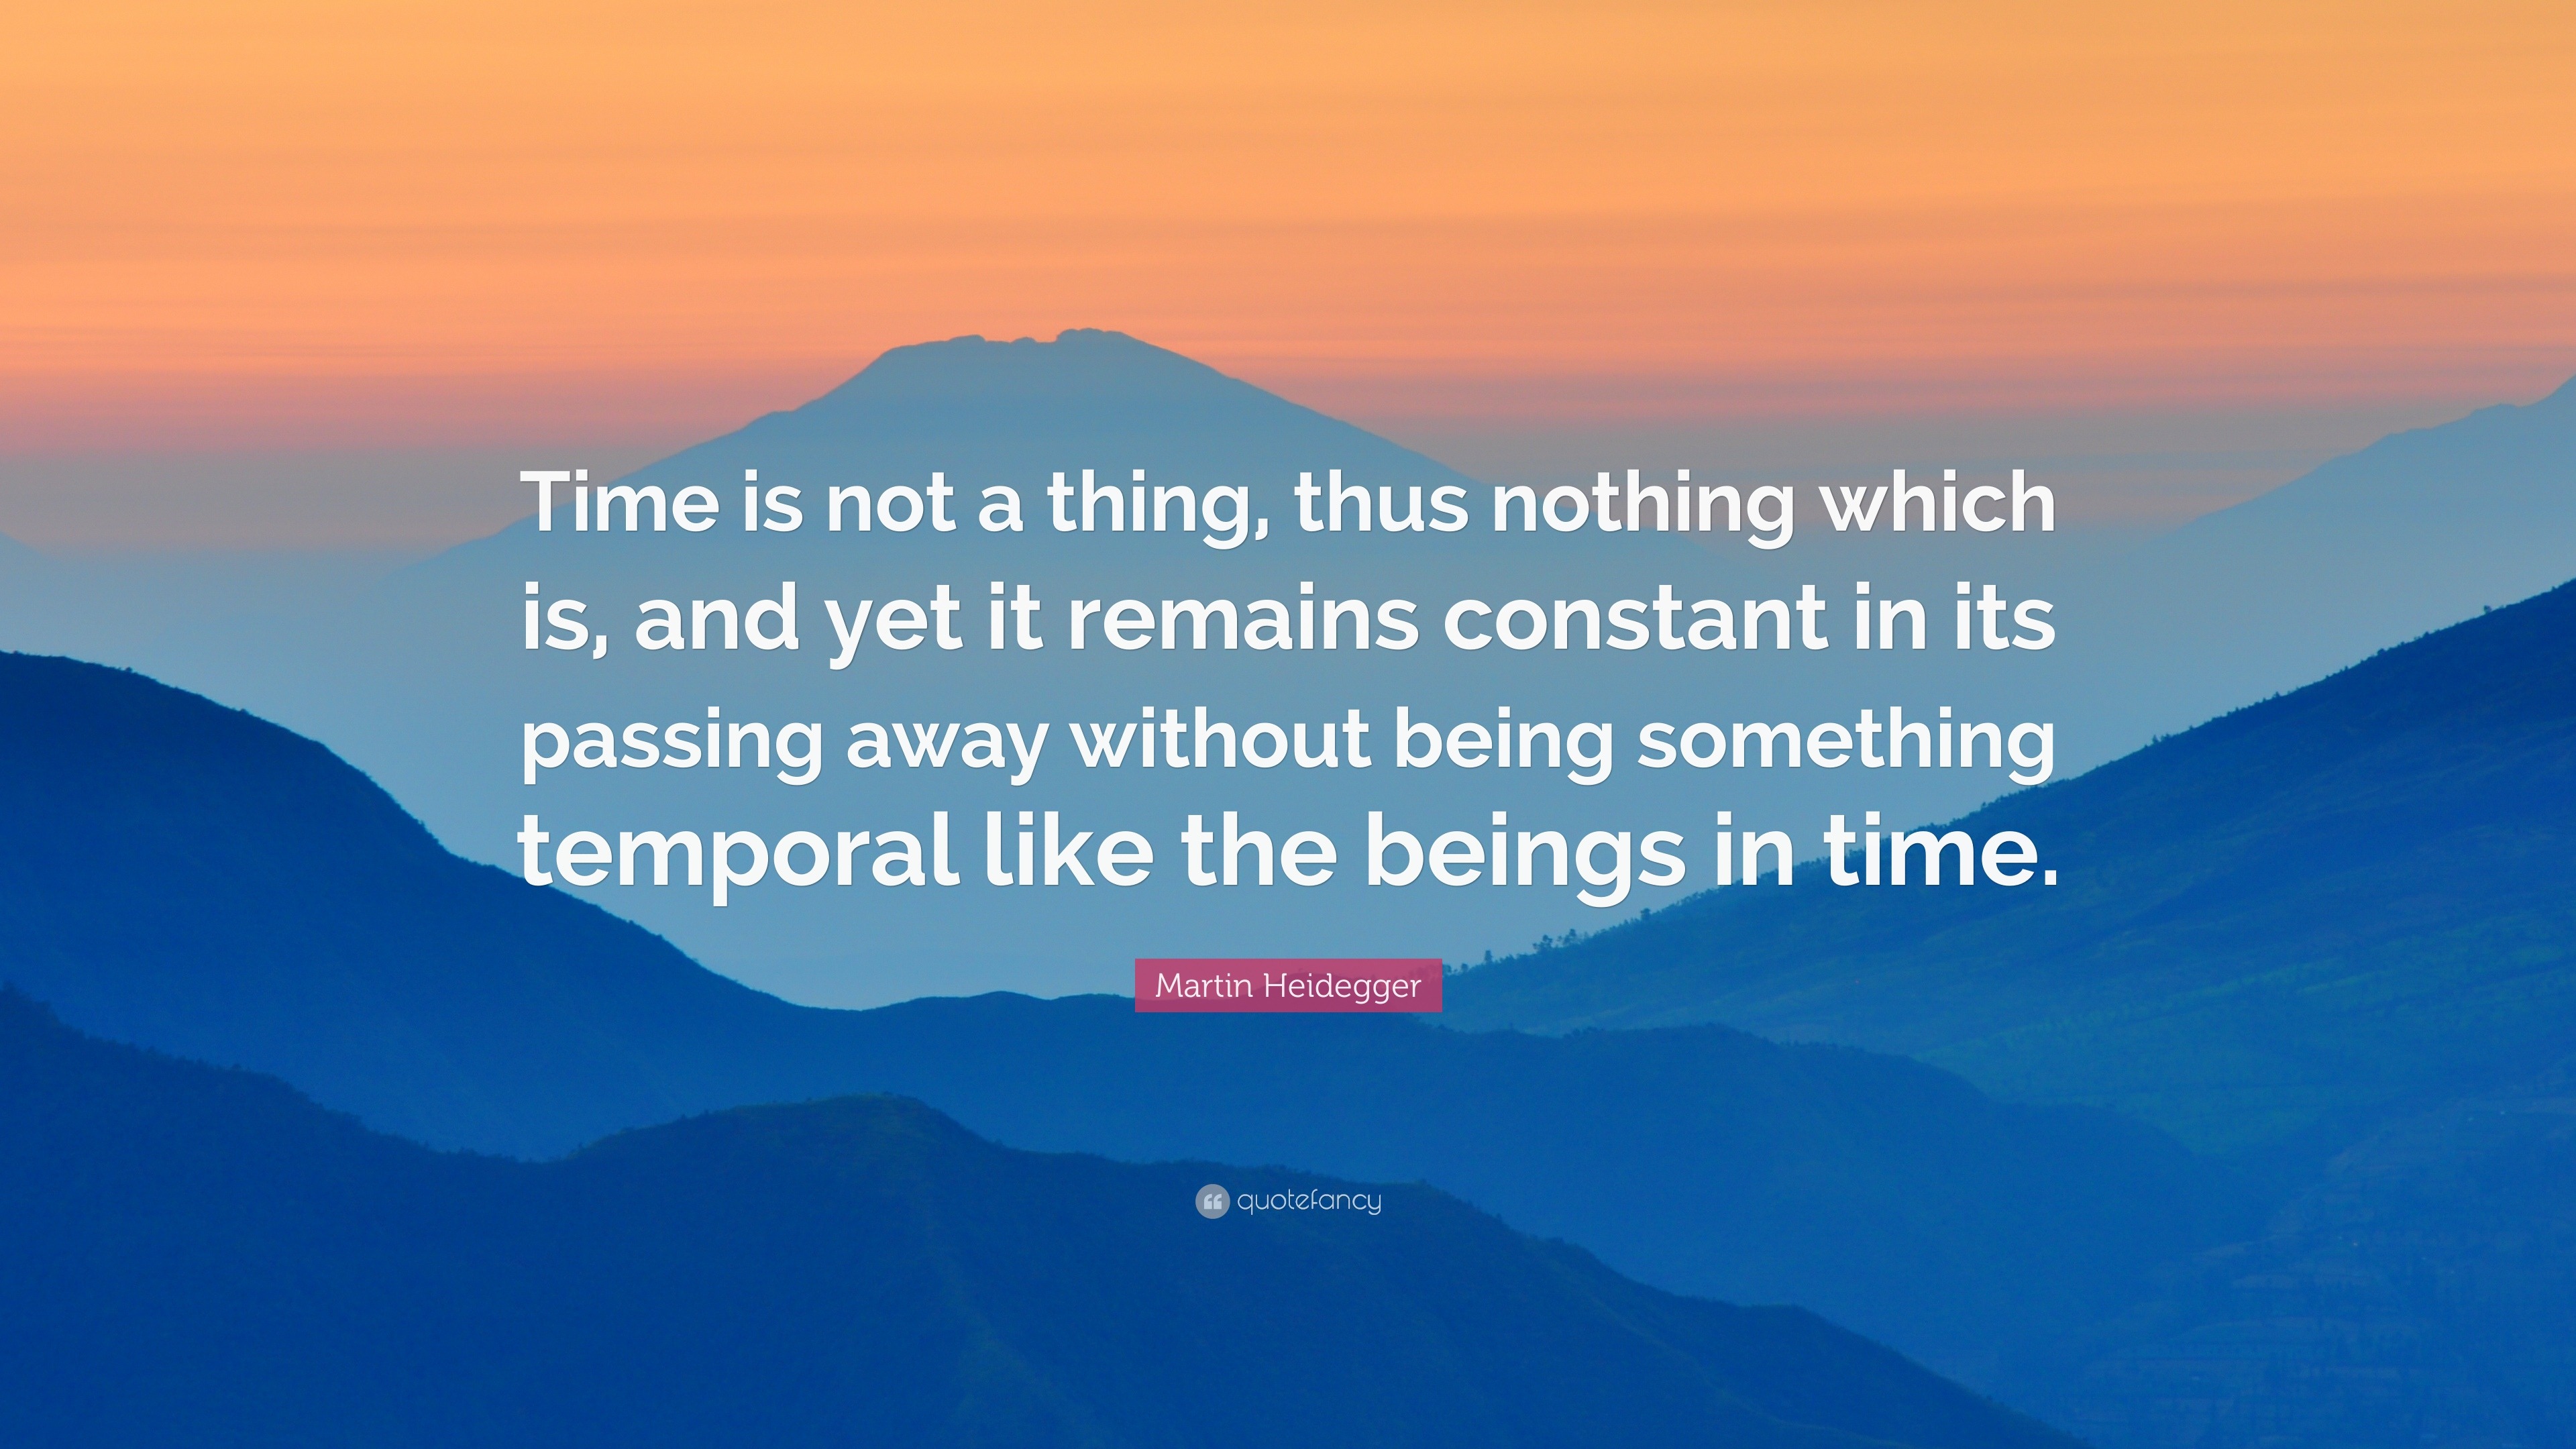 Martin Heidegger Quote Time Is Not A Thing Thus Nothing Which Is And Yet It Remains Constant In Its Passing Away Without Being Something Temp